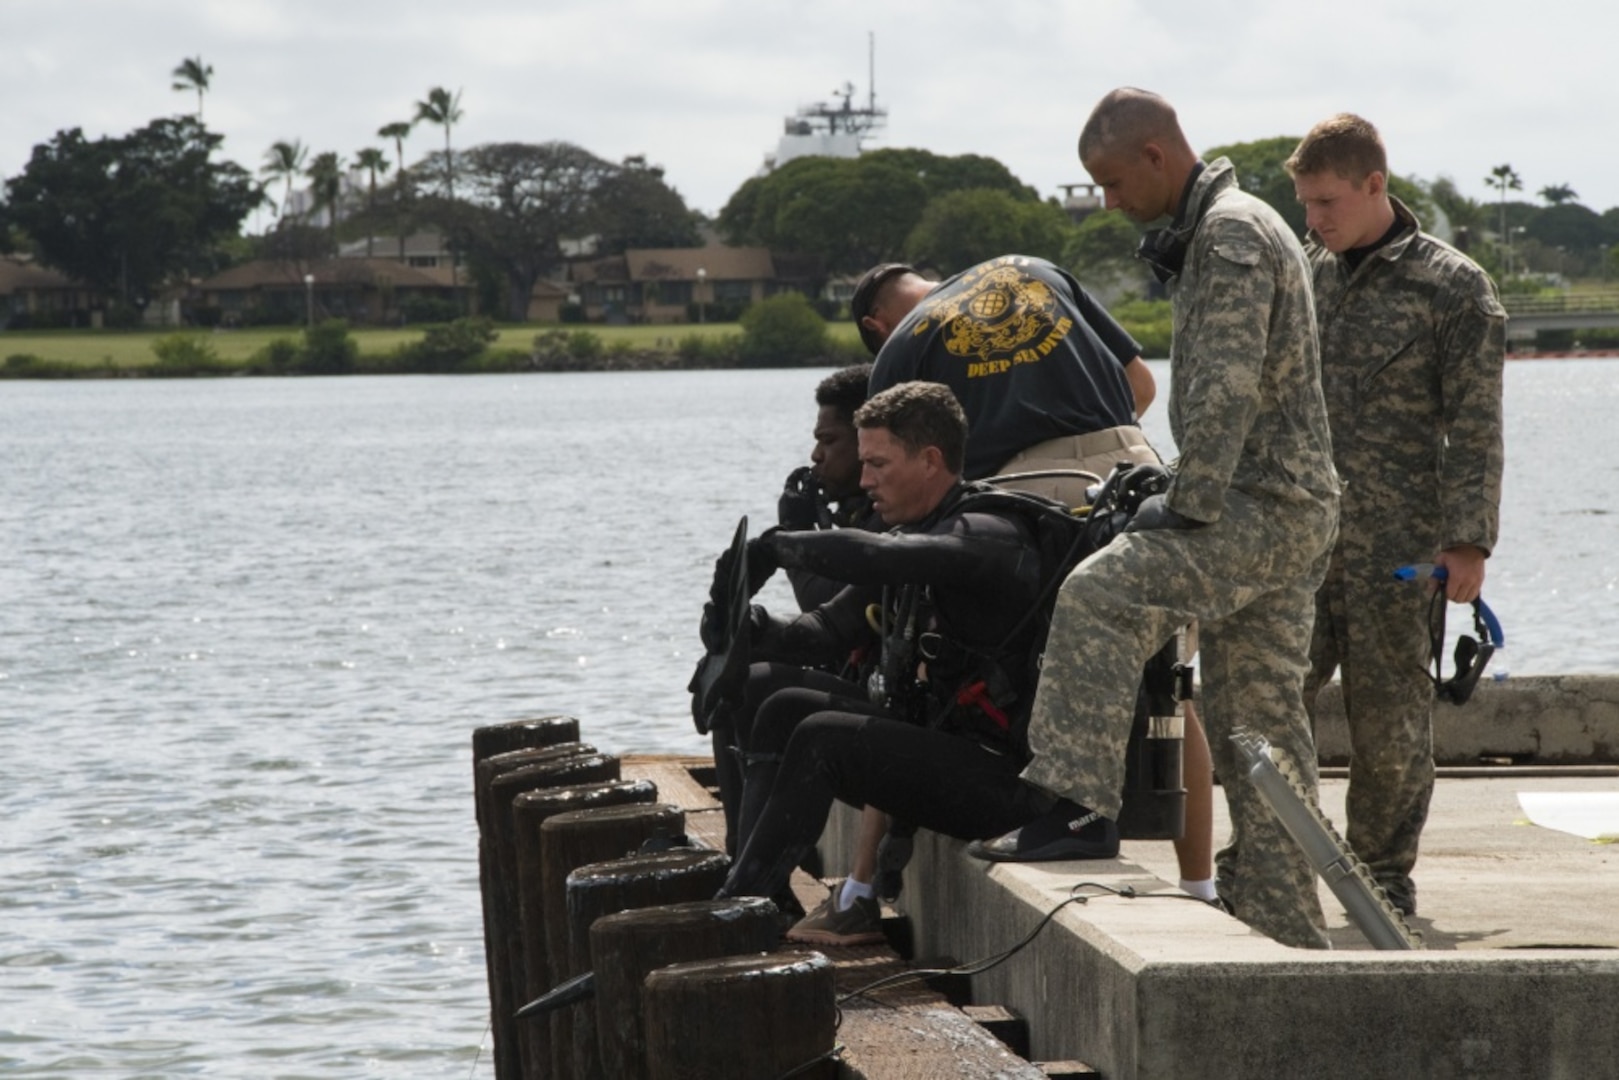 Army divers assigned to 7th Dive Detachment, 84th Engineer Battalion, prepare to demonstrate repair techniques on pier support pilings, March 3, 2017.  